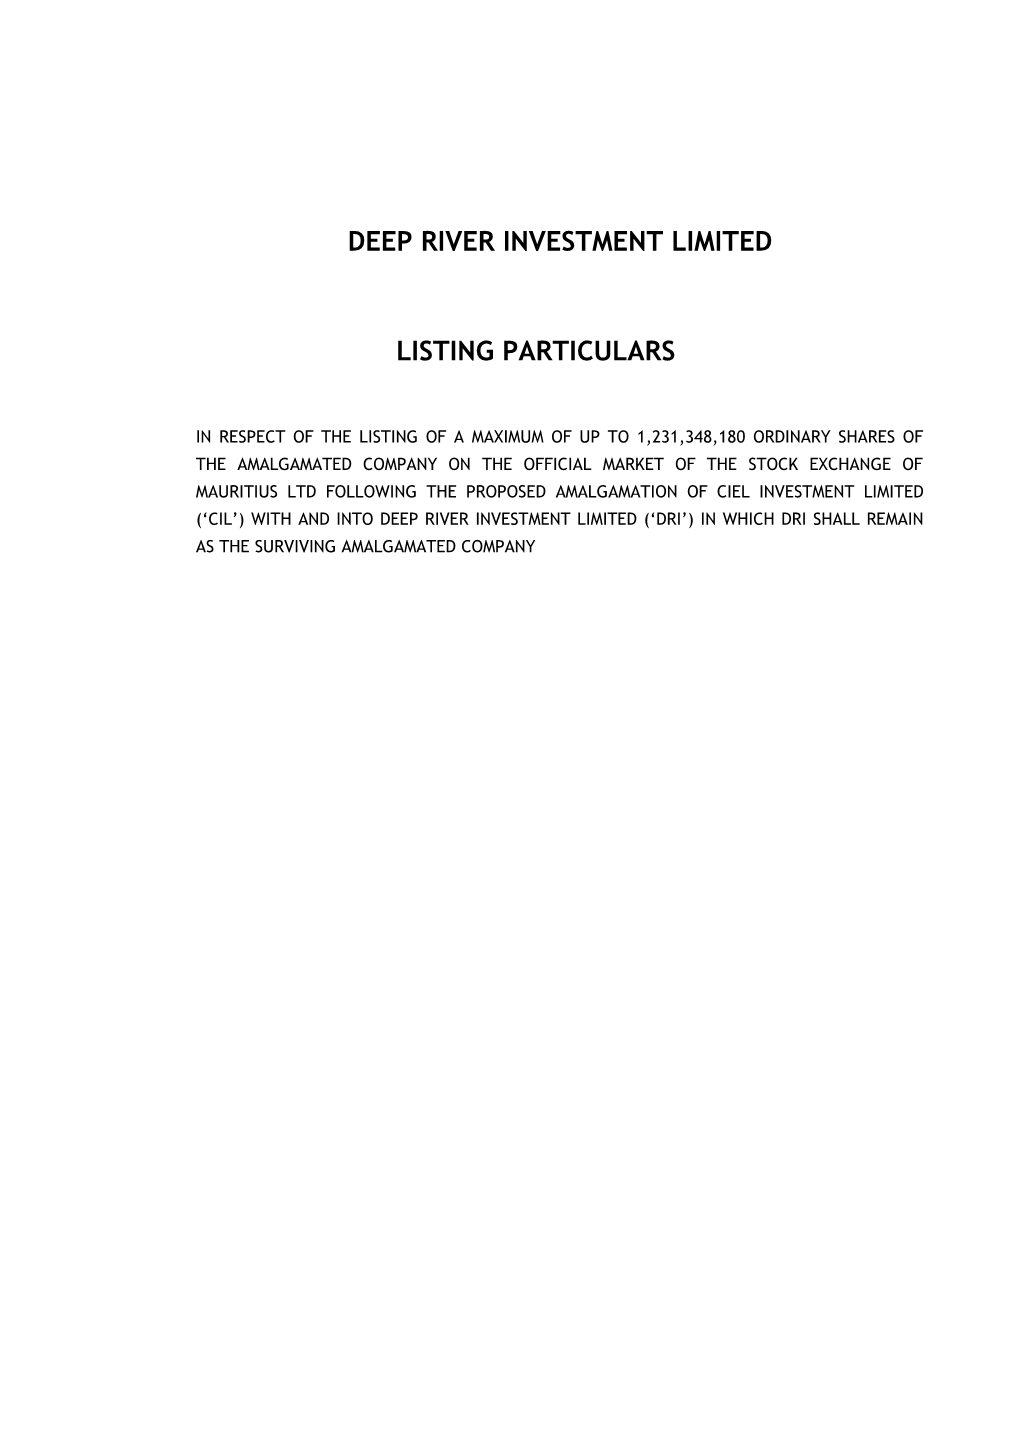 Deep River Investment Limited